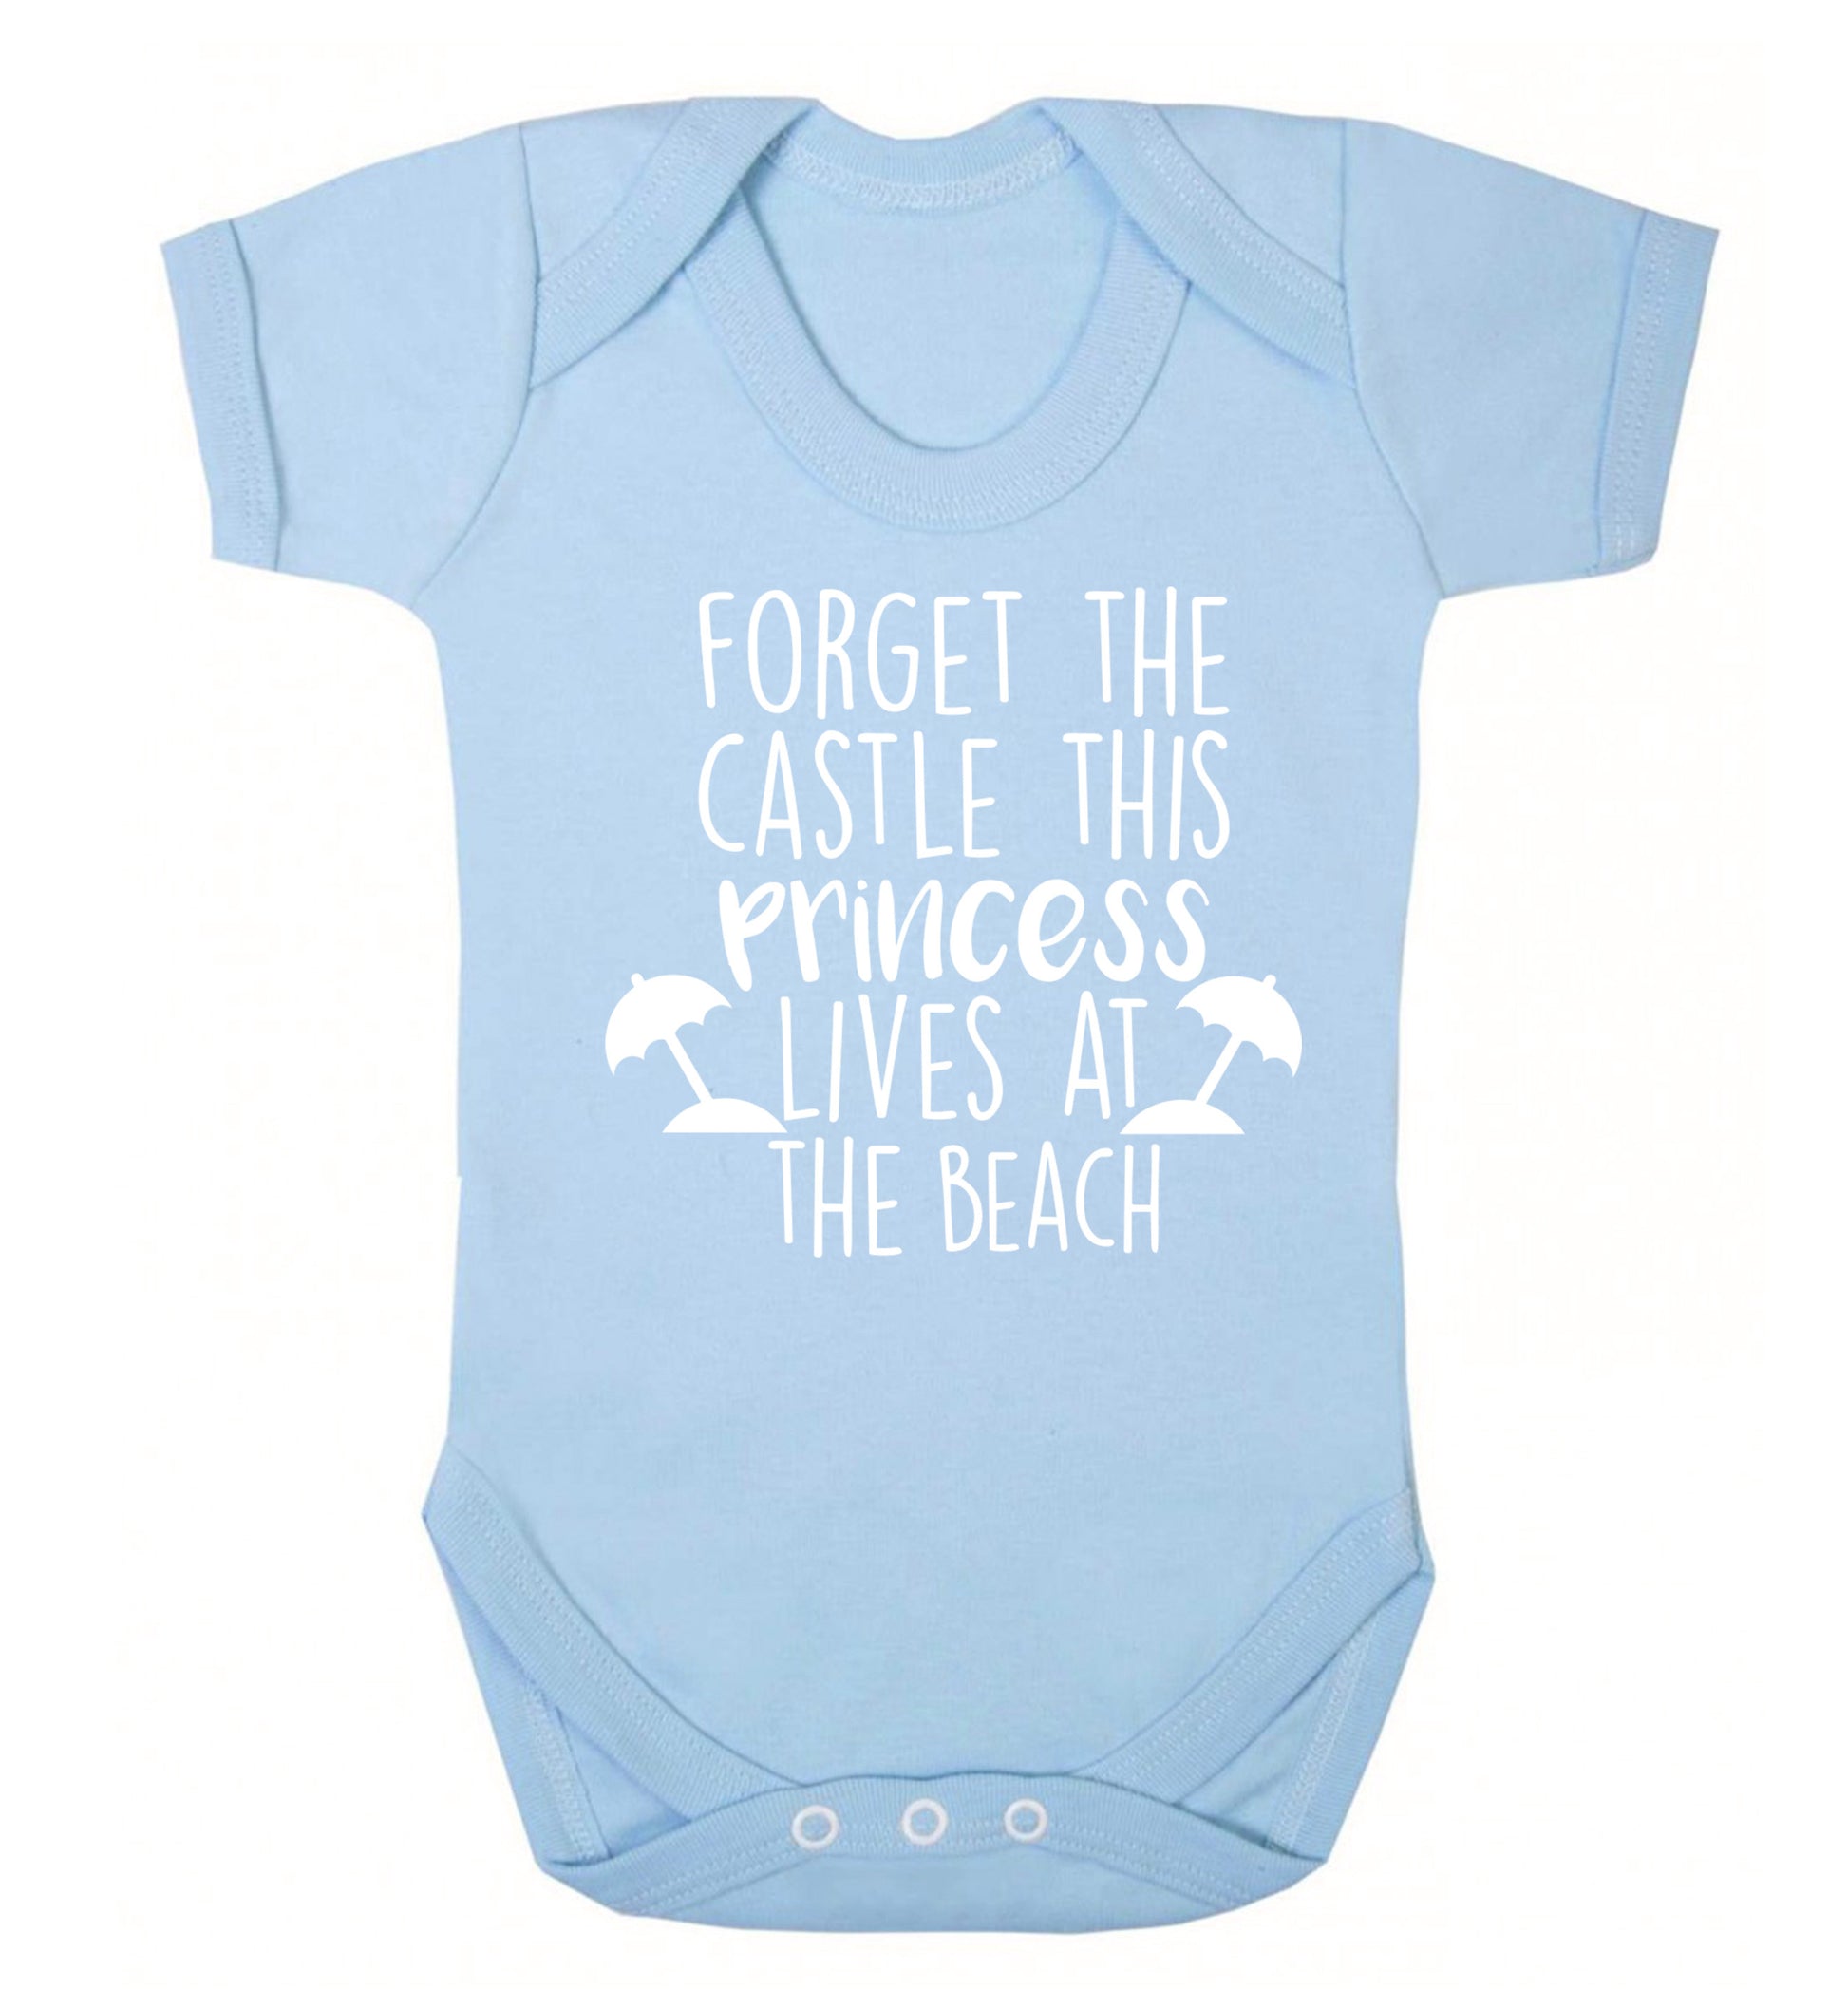 Forget the castle this princess lives at the beach Baby Vest pale blue 18-24 months